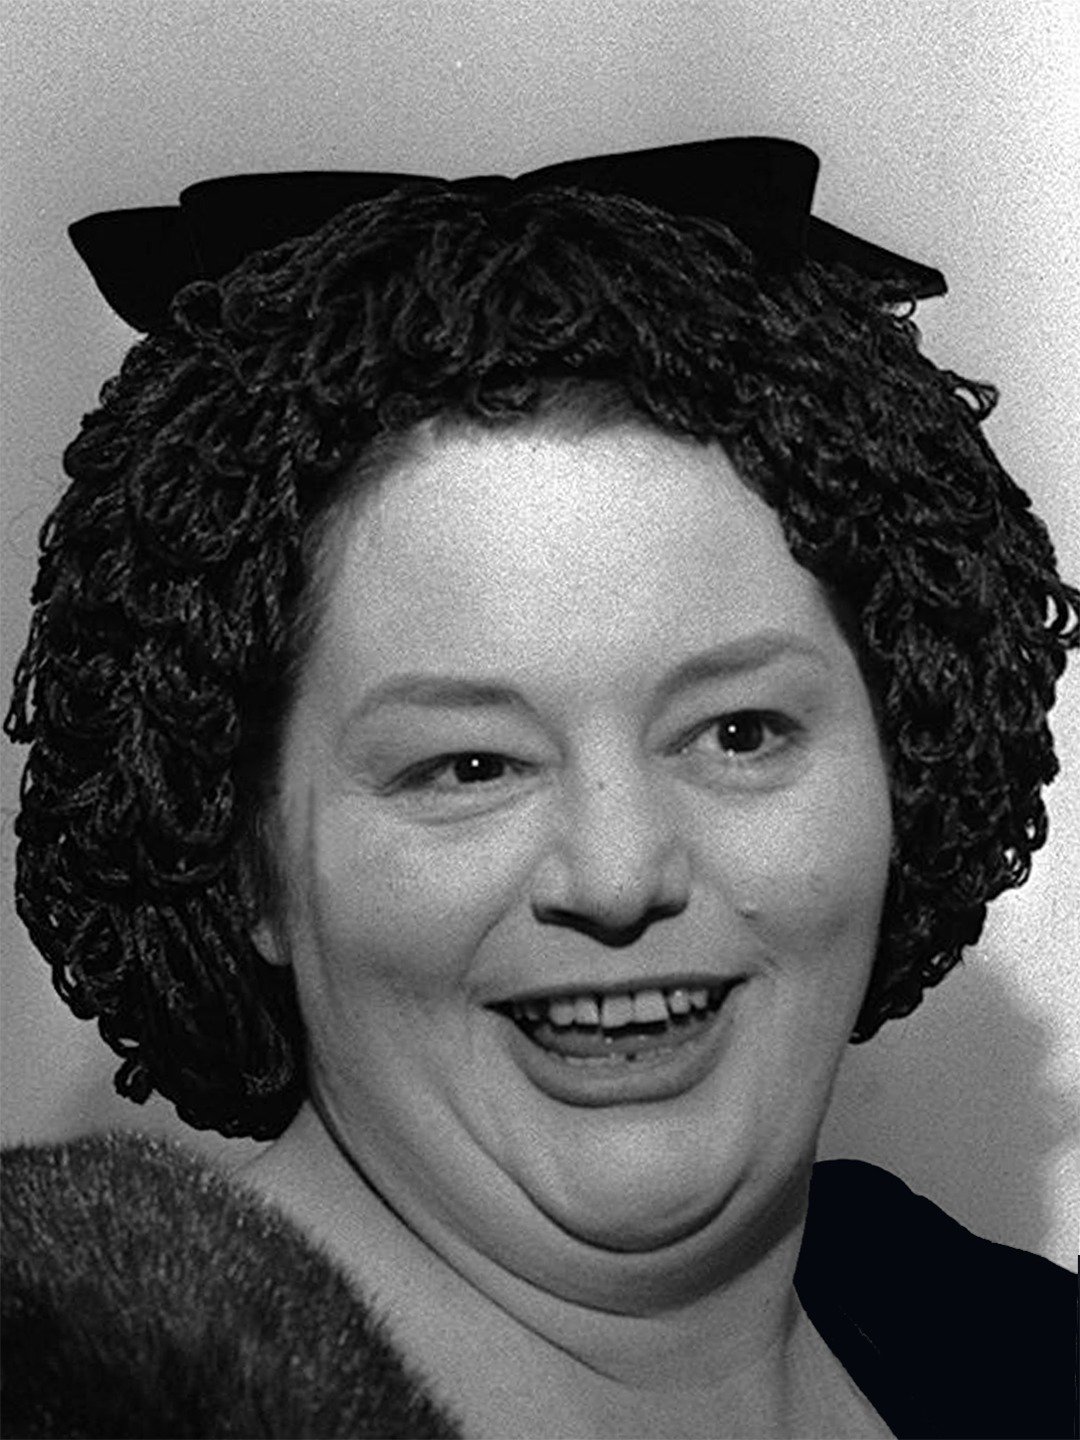 How tall is Hattie Jacques?